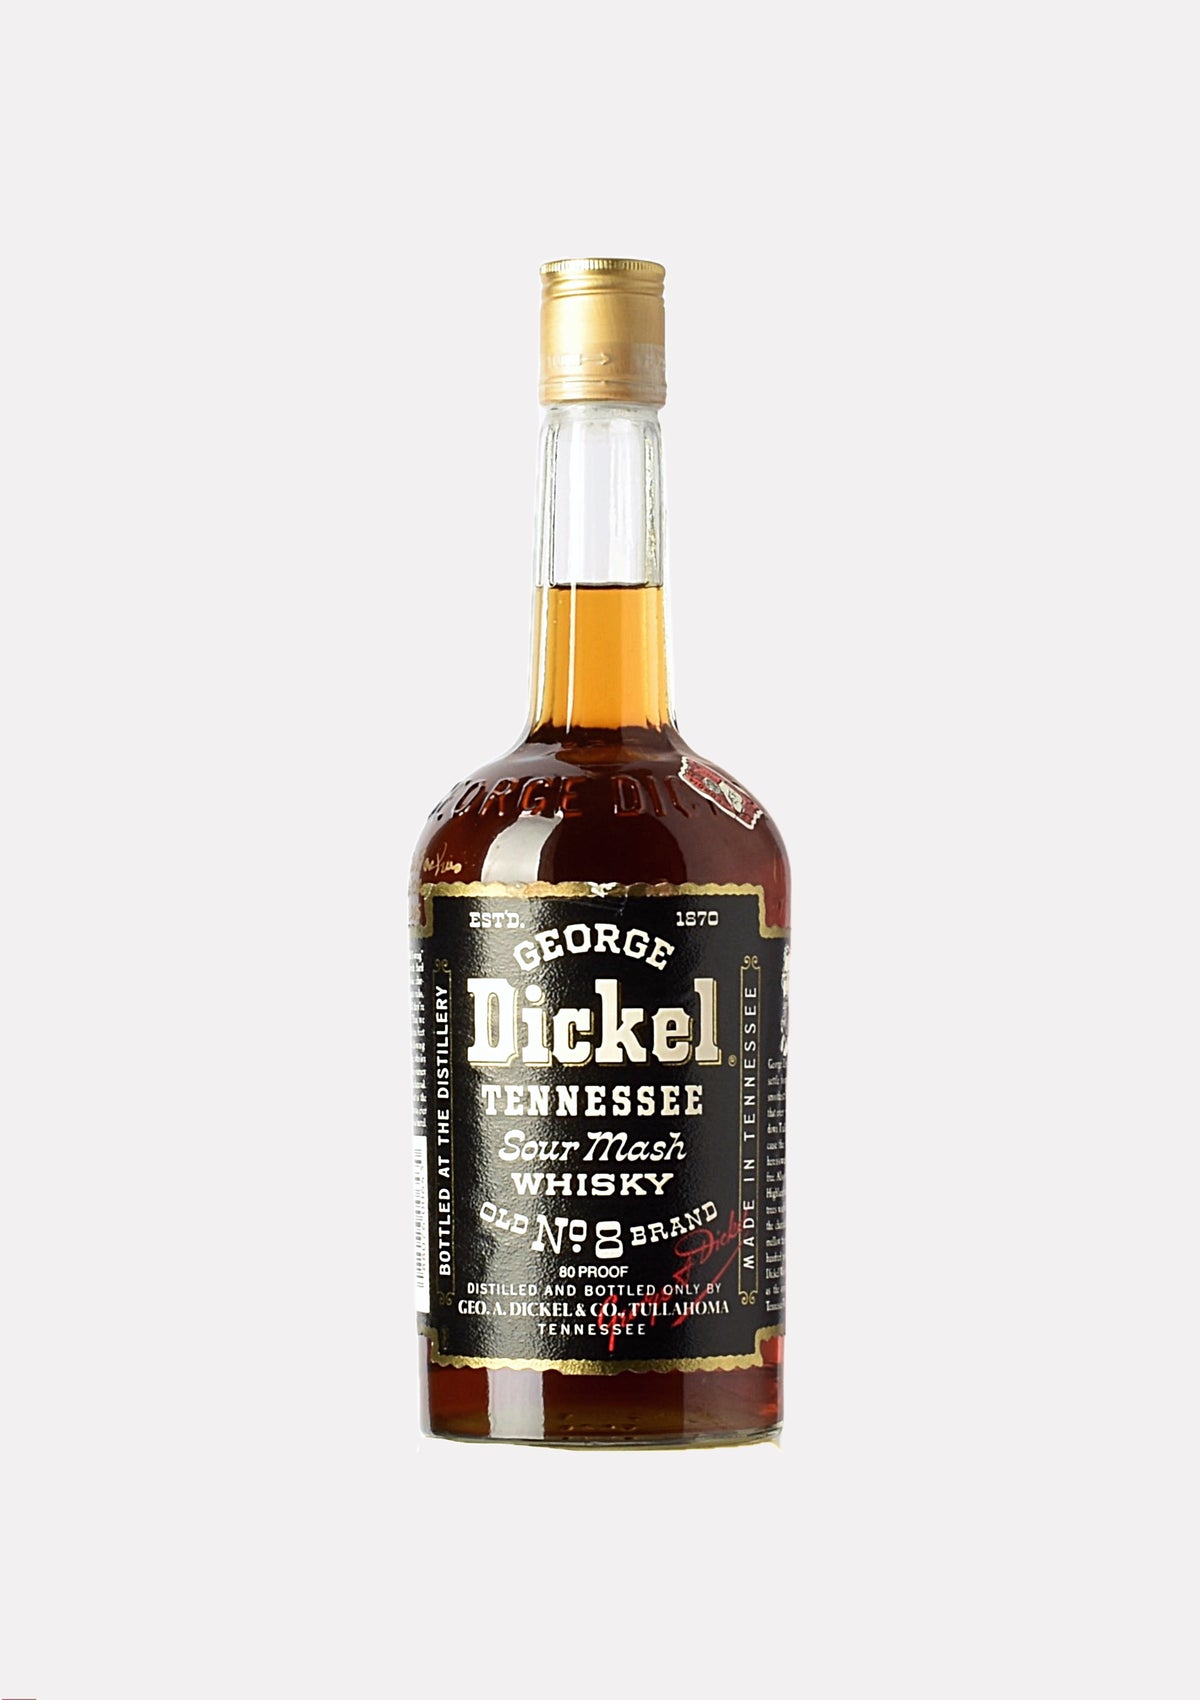 George Dickel Tennessee Sour Mash Whisky Old No. 8 Brand